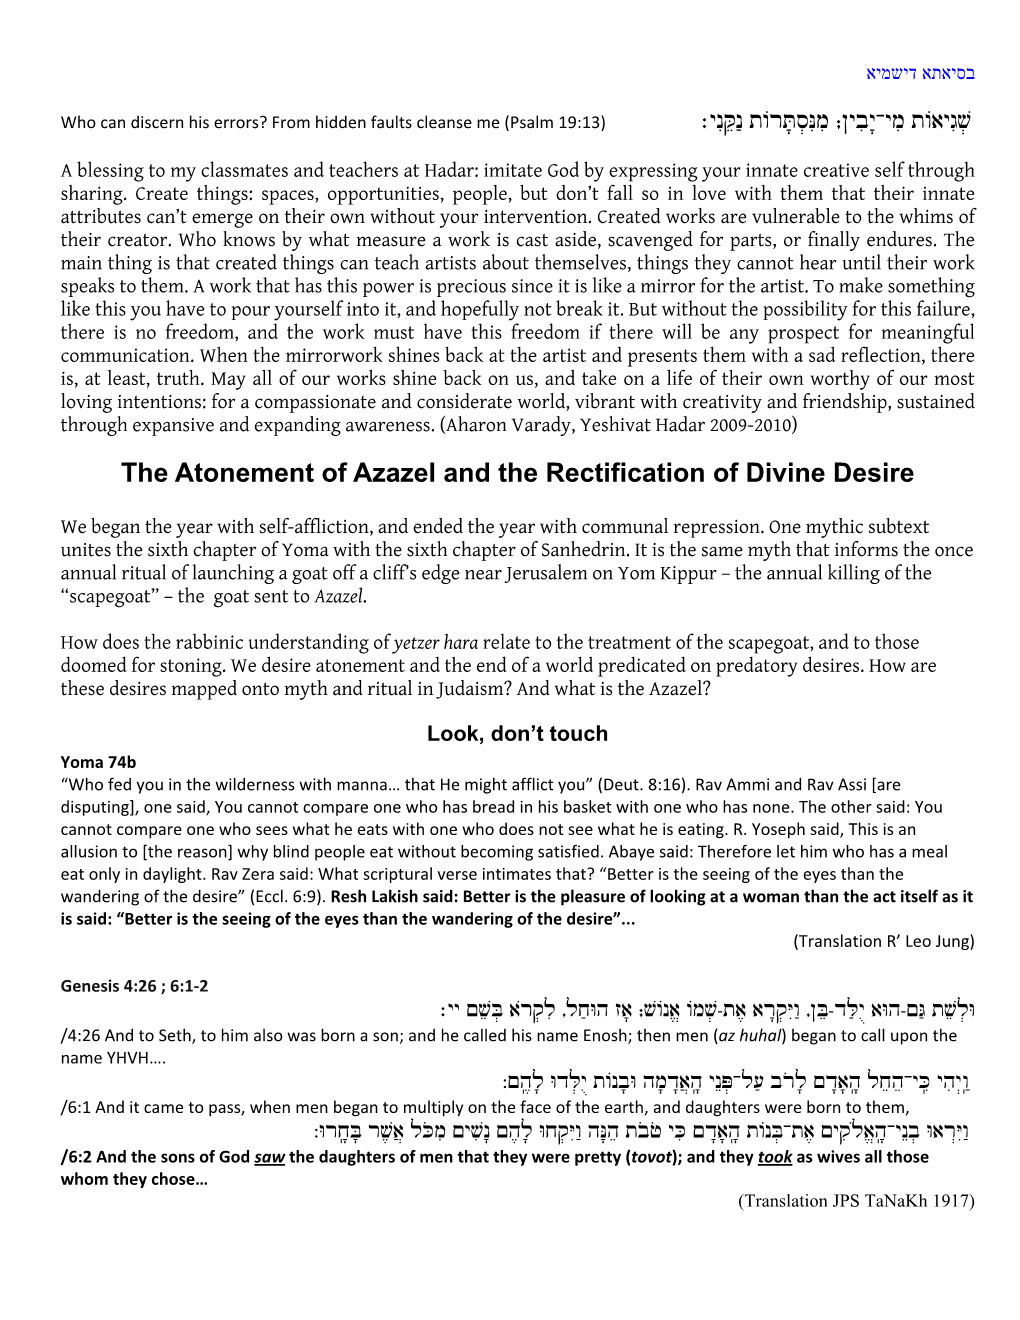 The Atonement of Azazel and the Rectification of Divine Desire